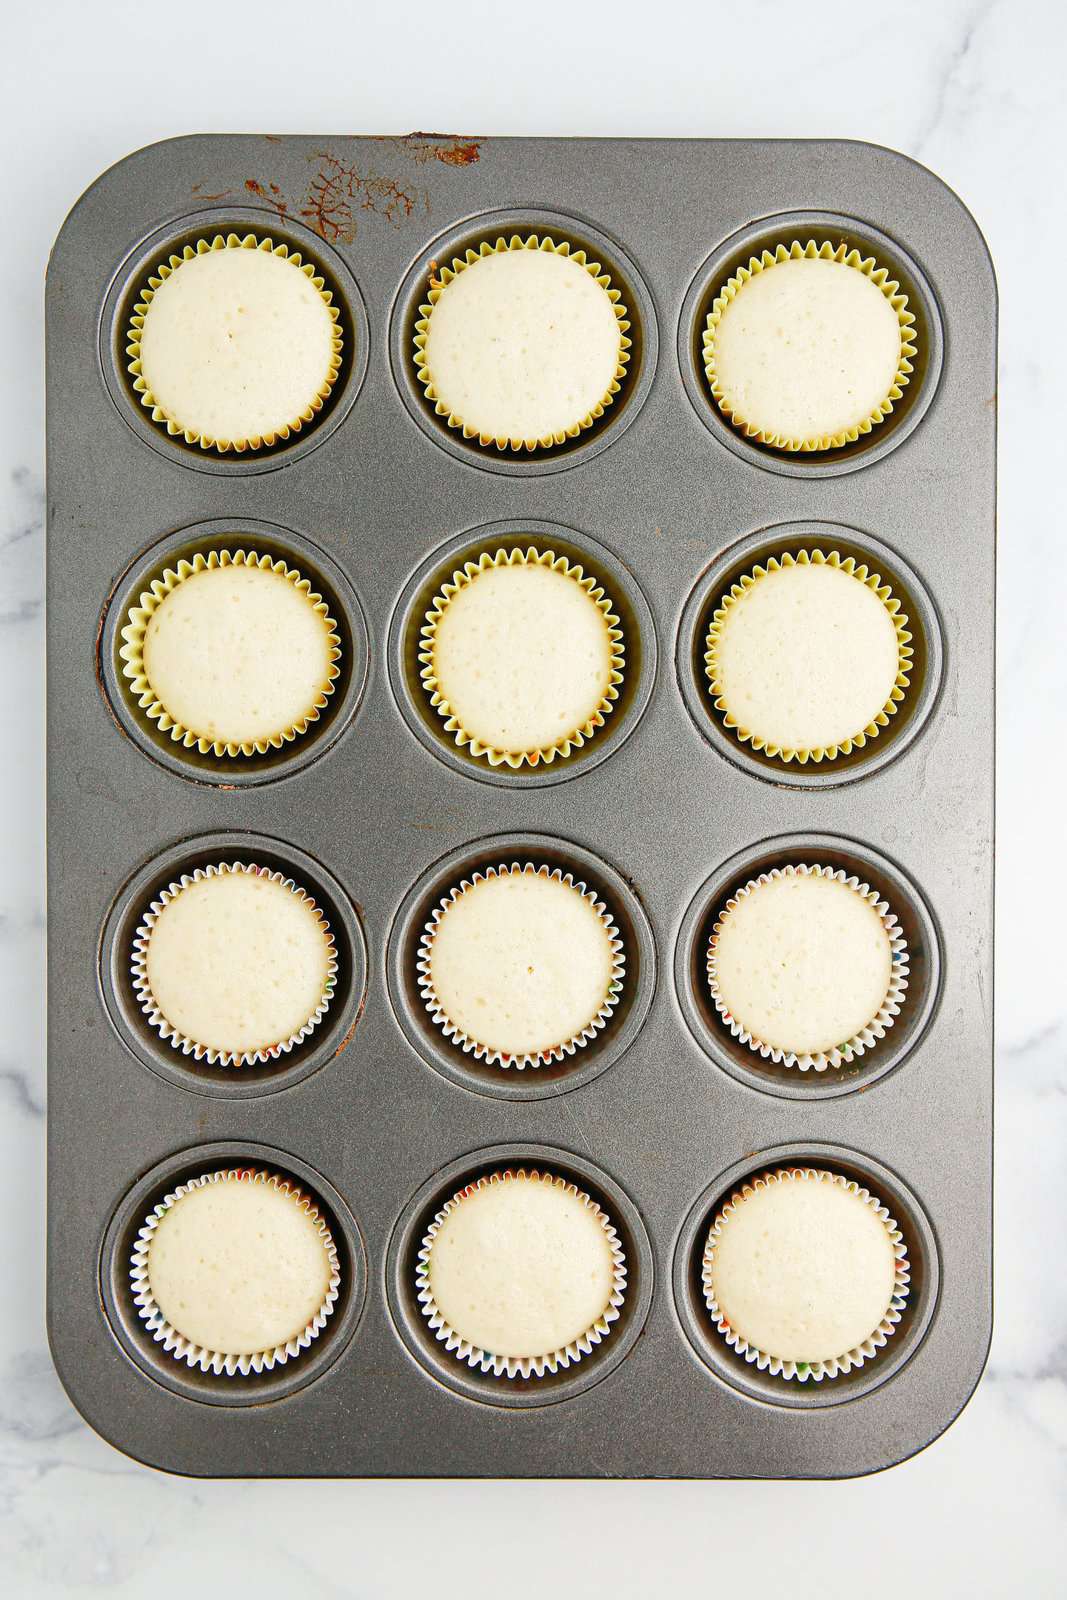 Baked cupcakes in a cupcake tin.